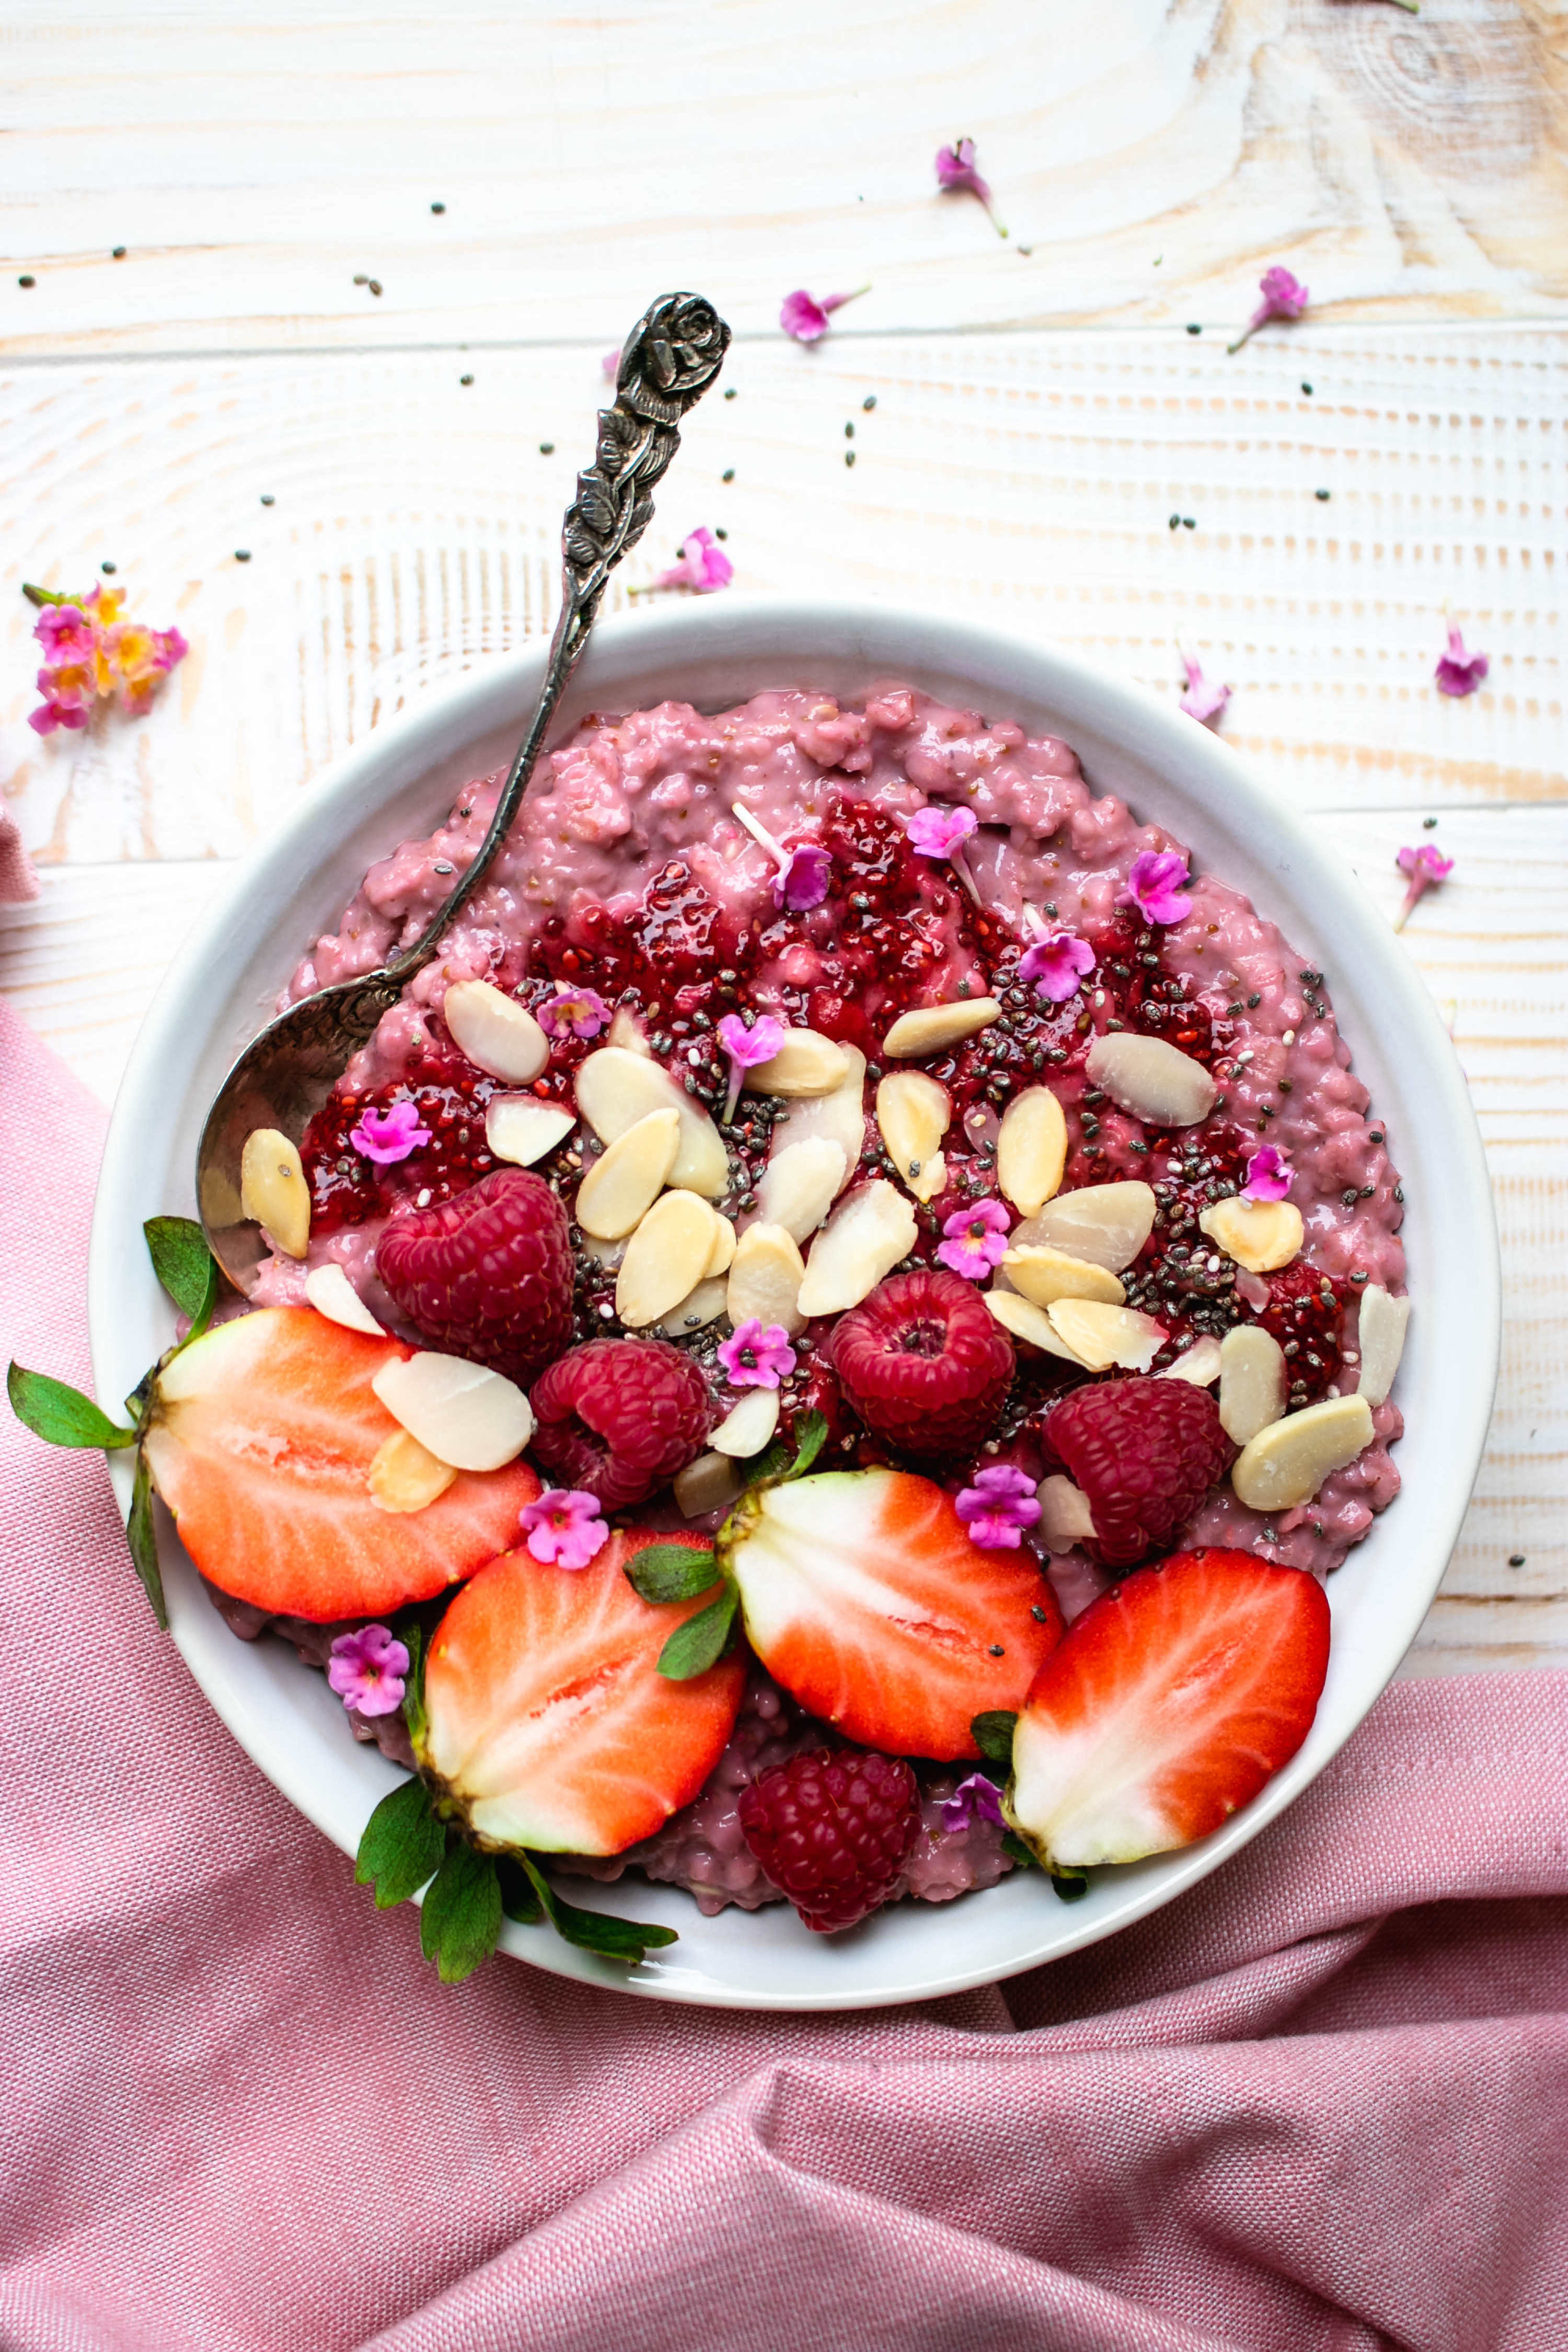 Strawberry Banana Oatmeal served in a bowl topped with fresh berries and almonds.